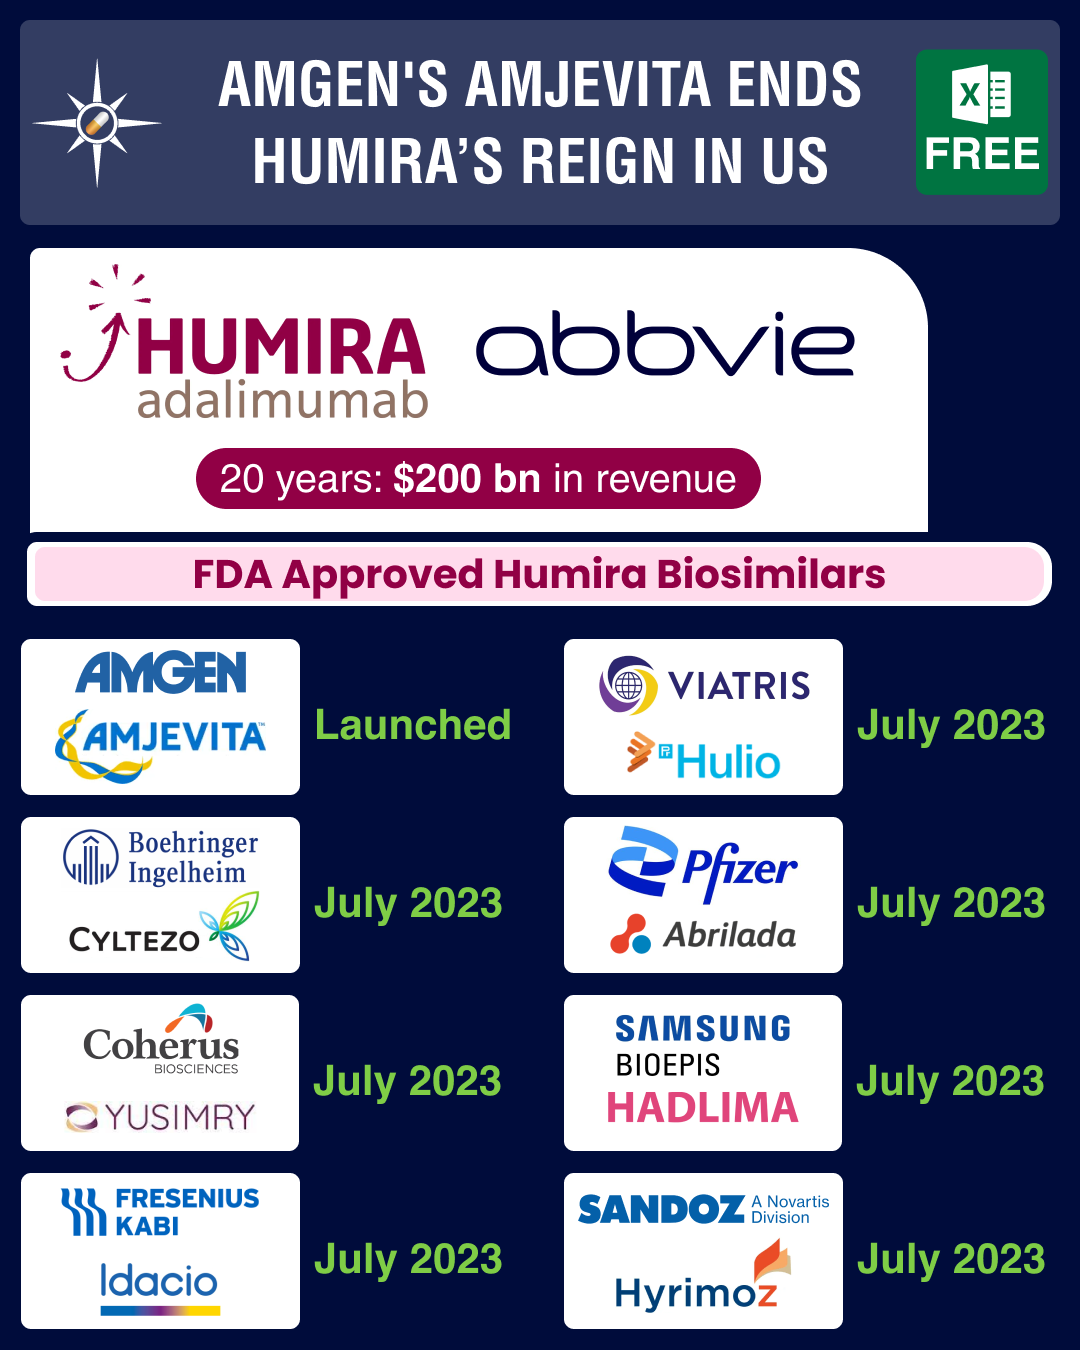 Amgen ends Humira’s 20-year reign in US with Amjevita launch